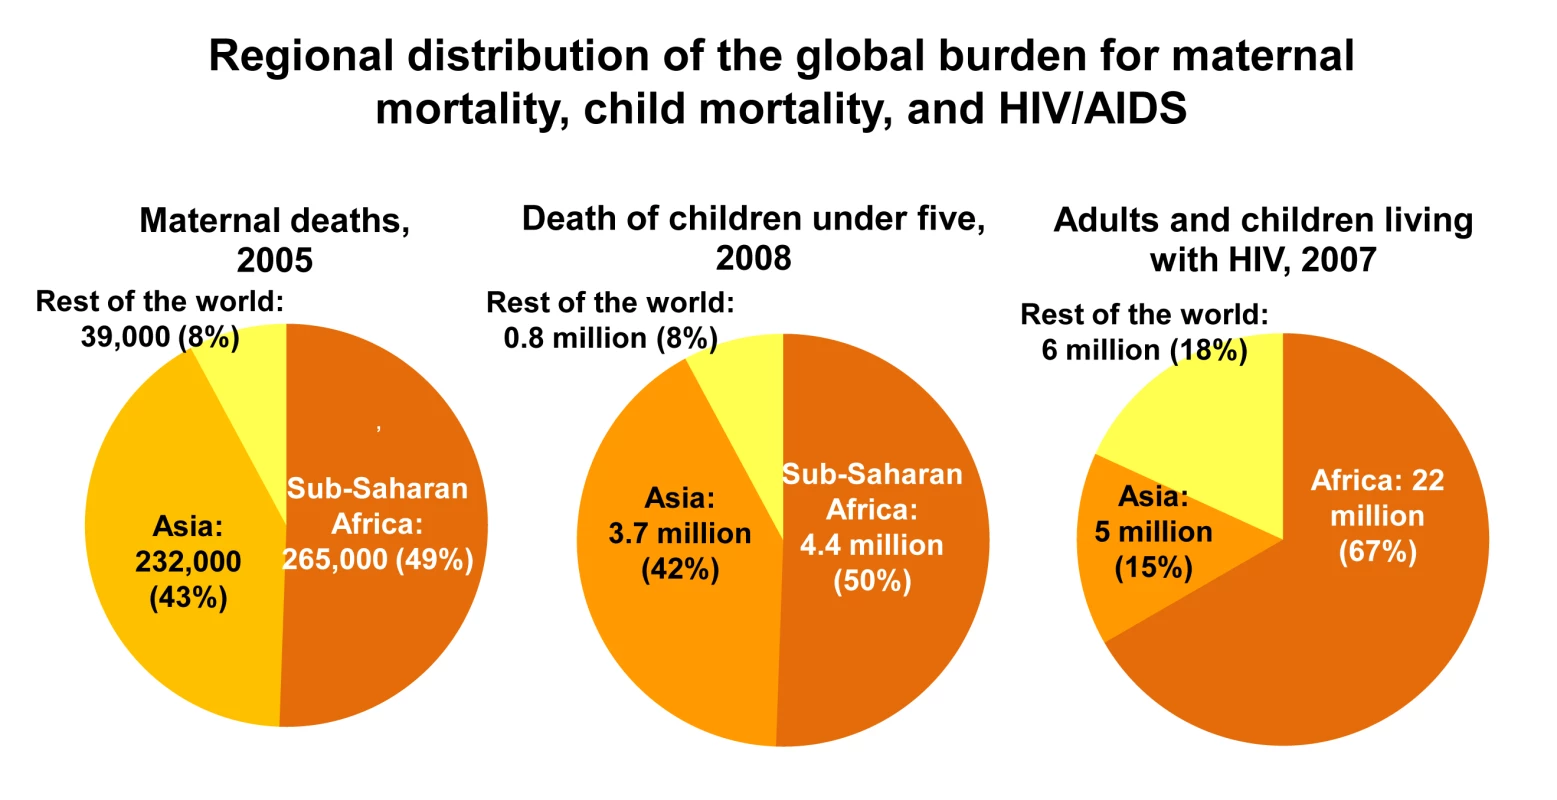 Regional distribution of the global burden for maternal mortality, child mortality, and HIV.